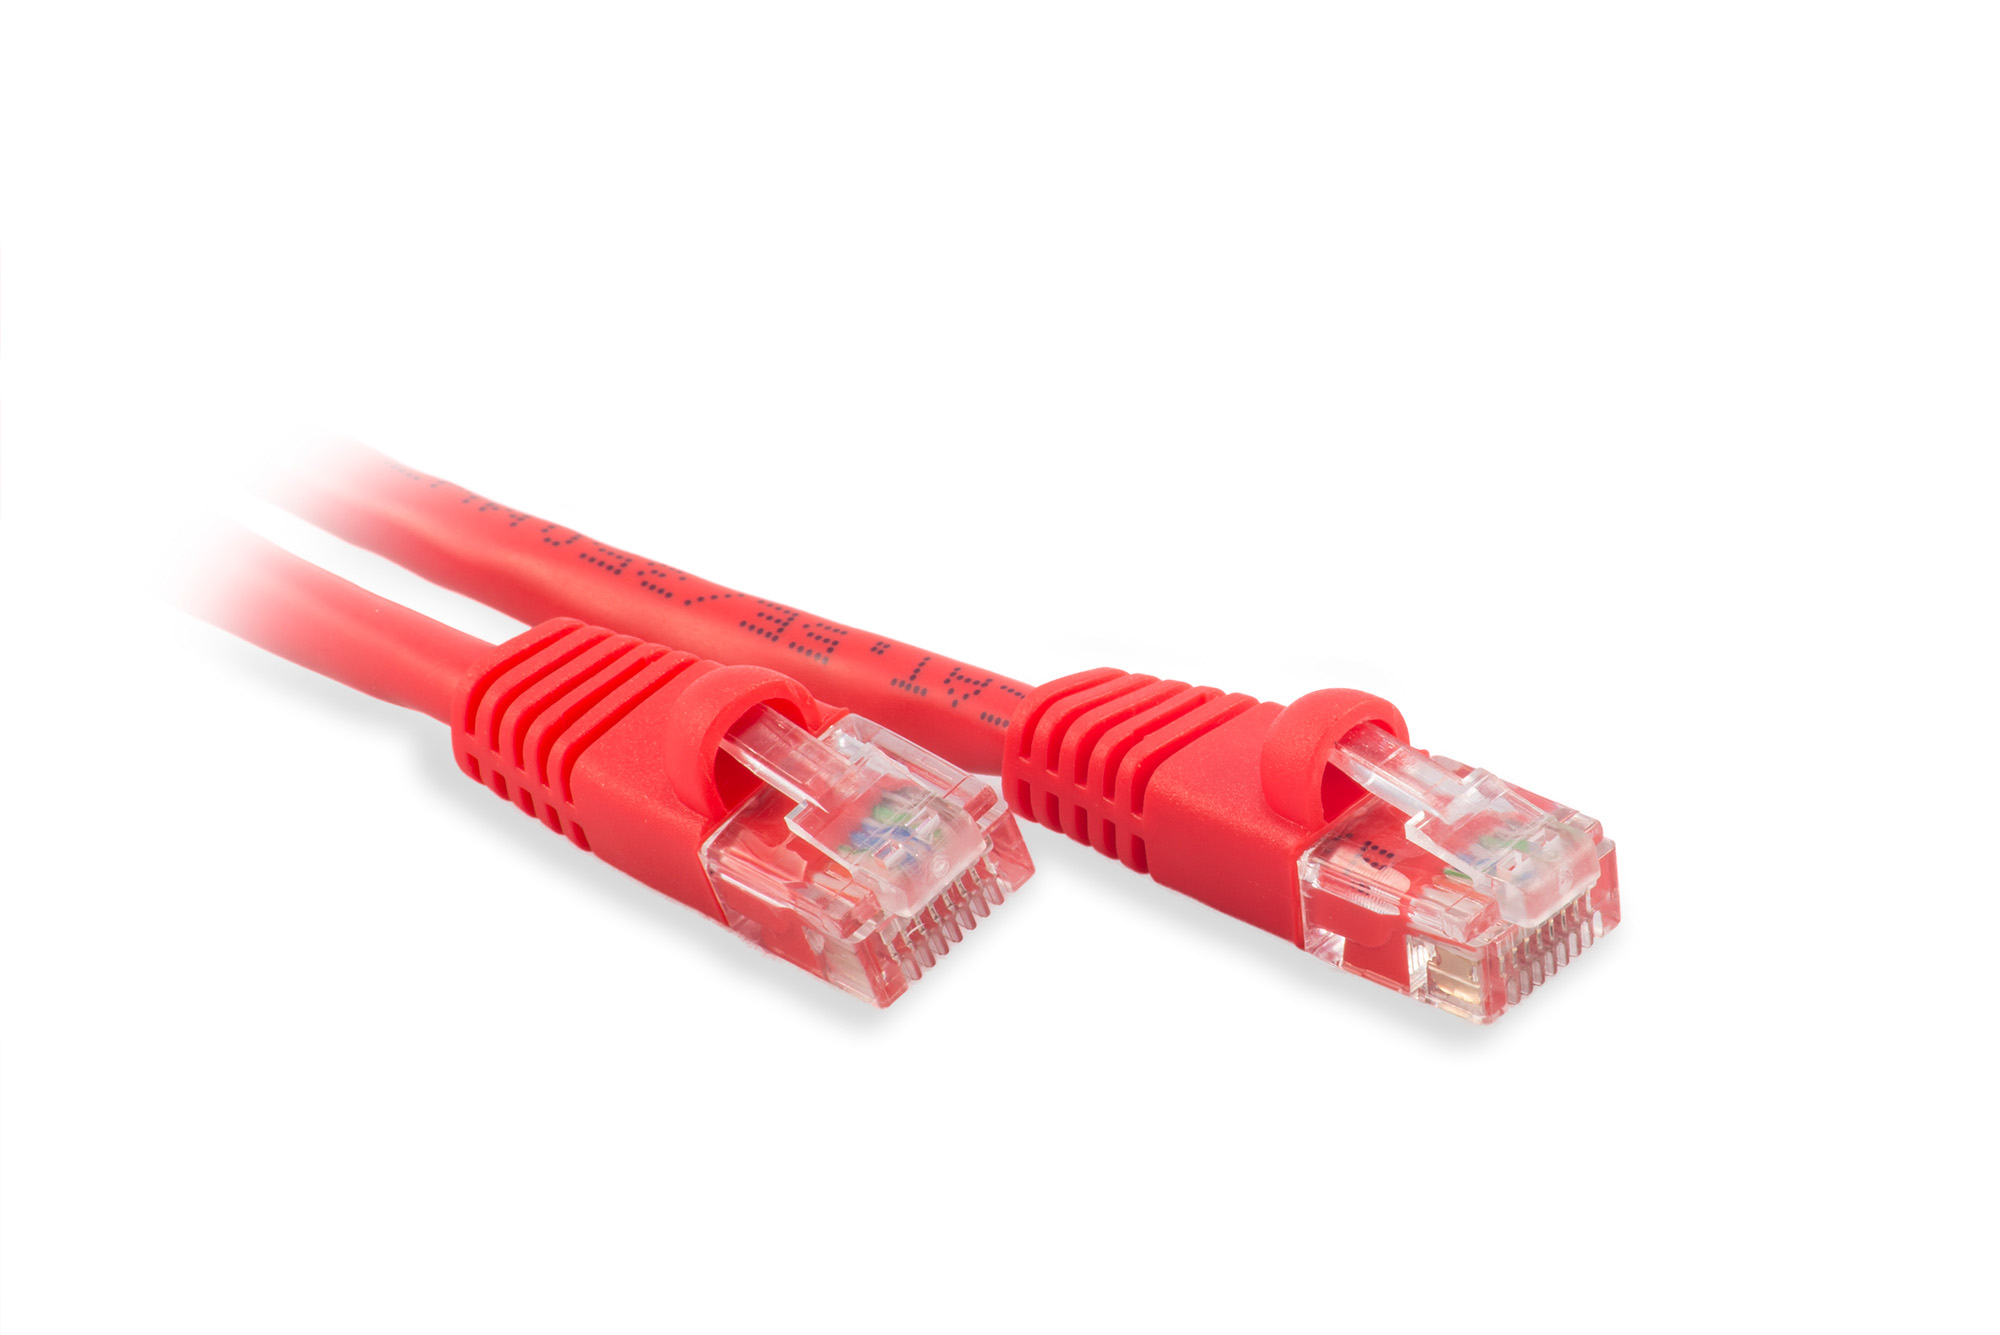 40ft Cat6 Ethernet Patch Cable - Red Color - Snagless Boot